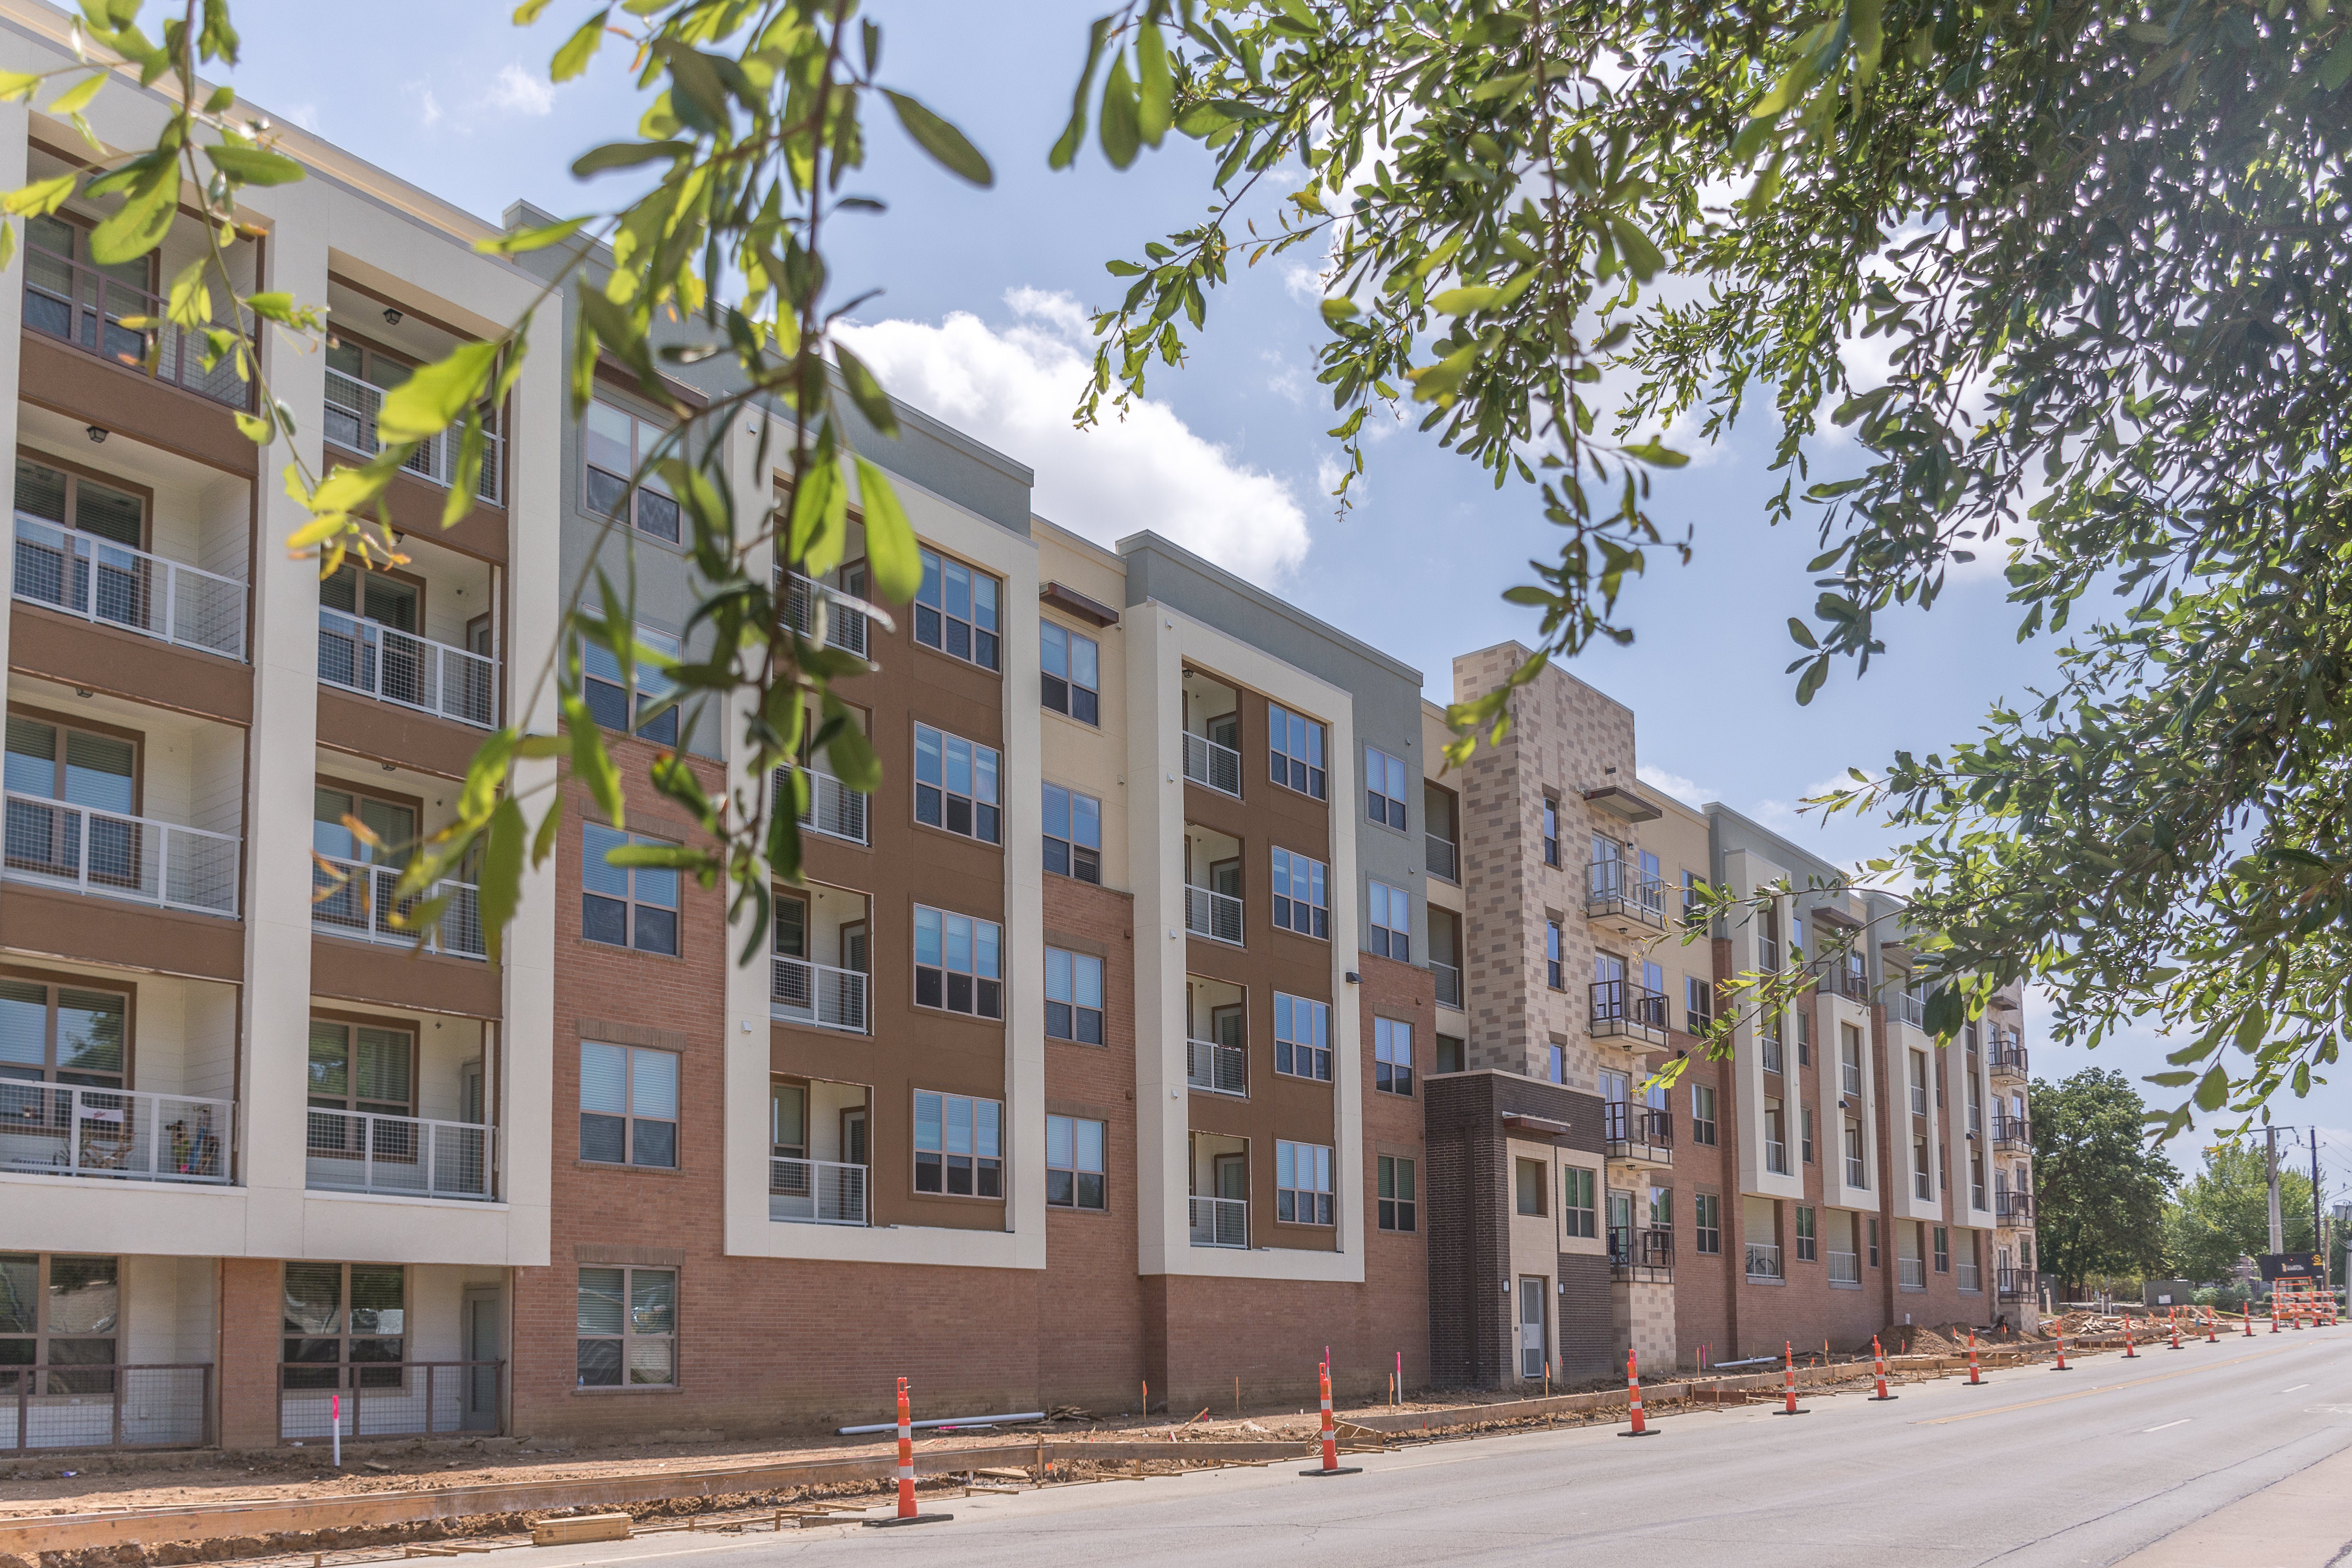 404 Border is a new 135-unit urban multi-family development that is only a short distance from UTA.